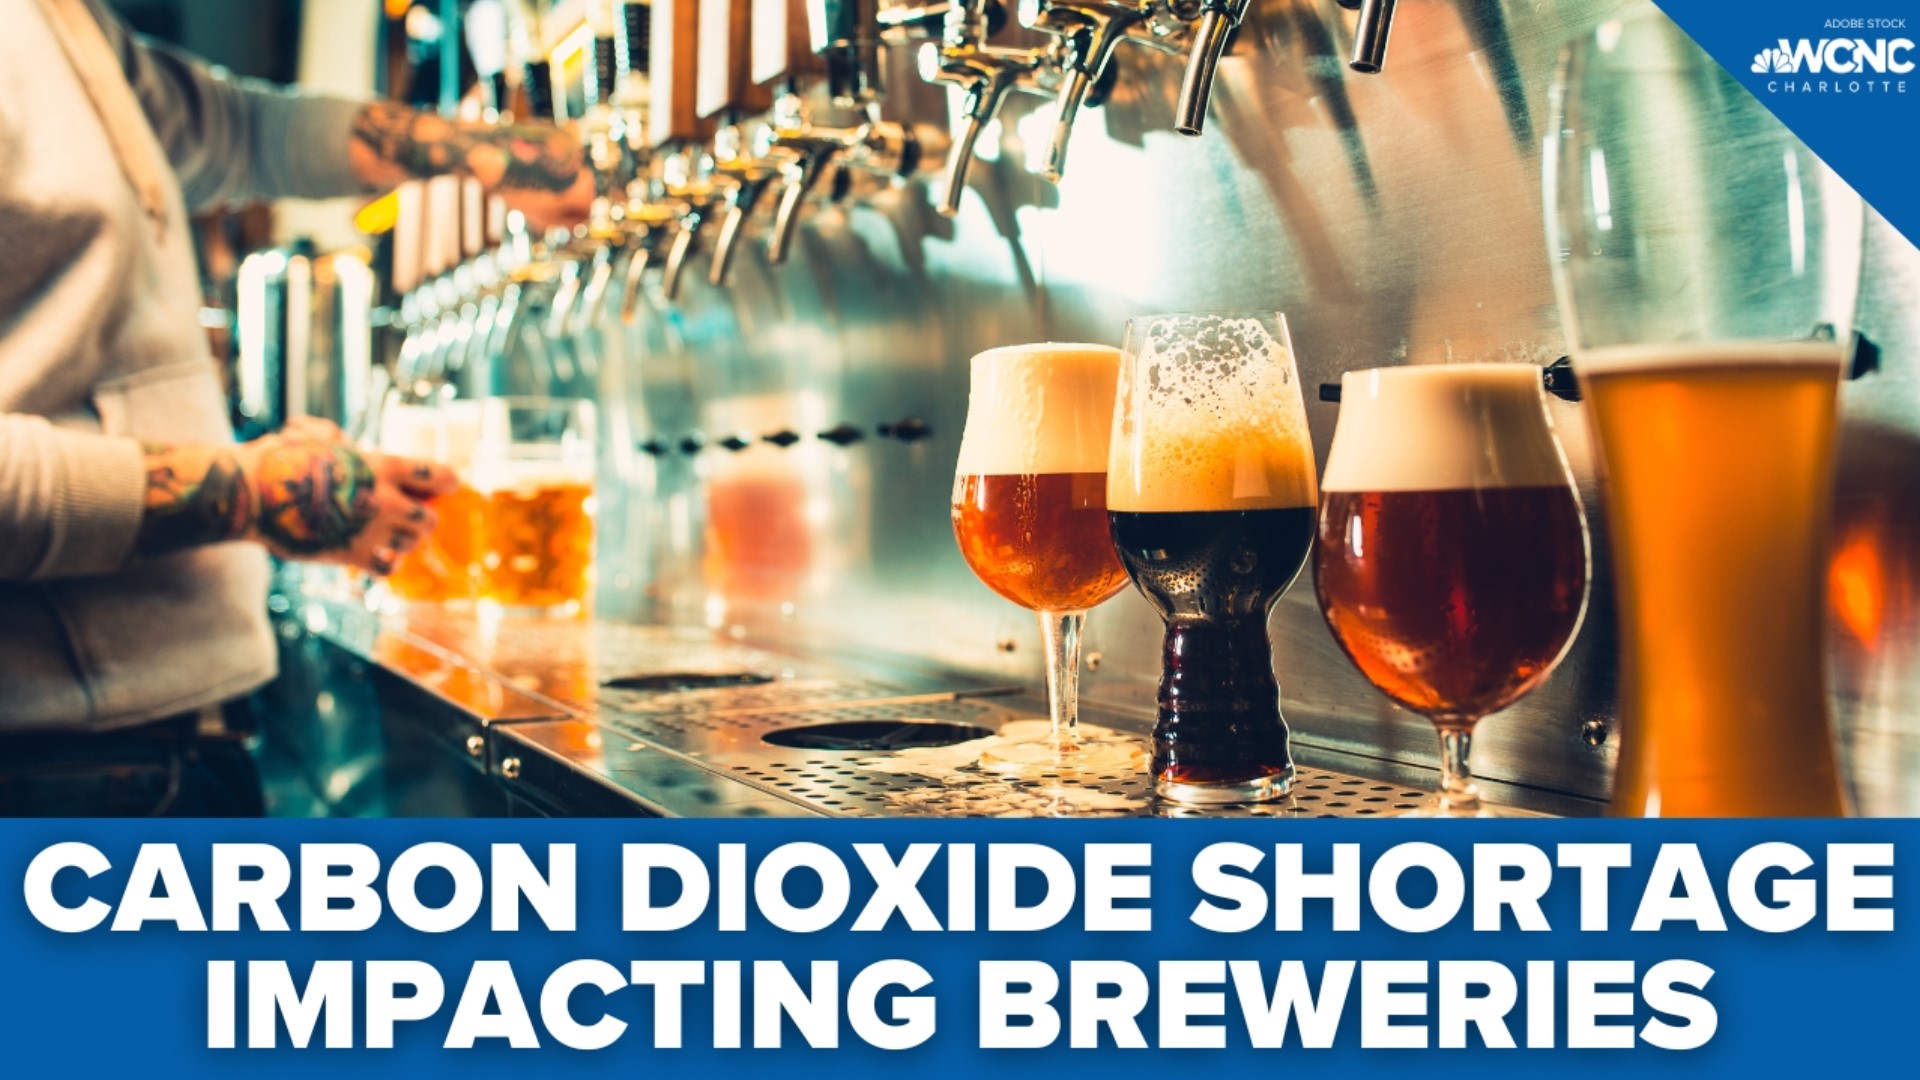 A nationwide shortage of carbon dioxide continues to create issues for the popular craft beer market.